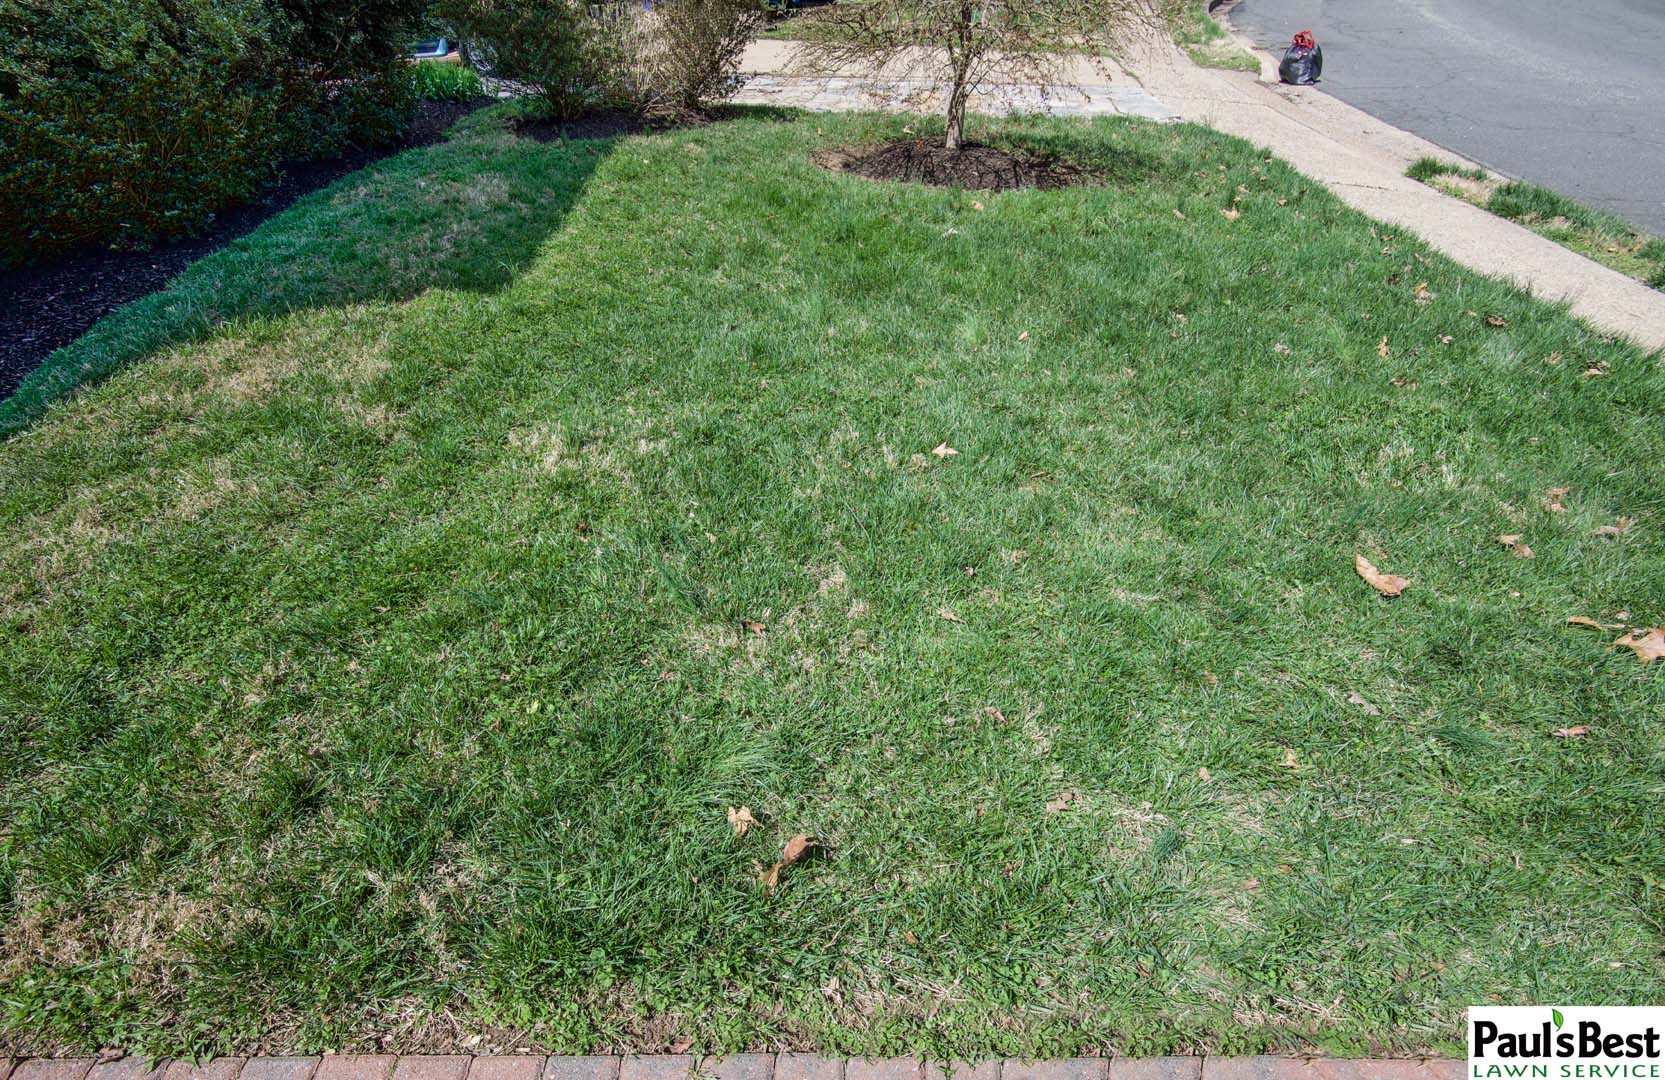 https://paulsbestlawn.com/pbls-img/portfolio/lawn-mowing-lawn-fertilization-and-treatment/before-and-after/web-ready/large/BALM1-f-After-2-Years-of-Pauls-Best-Turf-Care-Program-With-Mowing-in-Arlington-VA.jpg